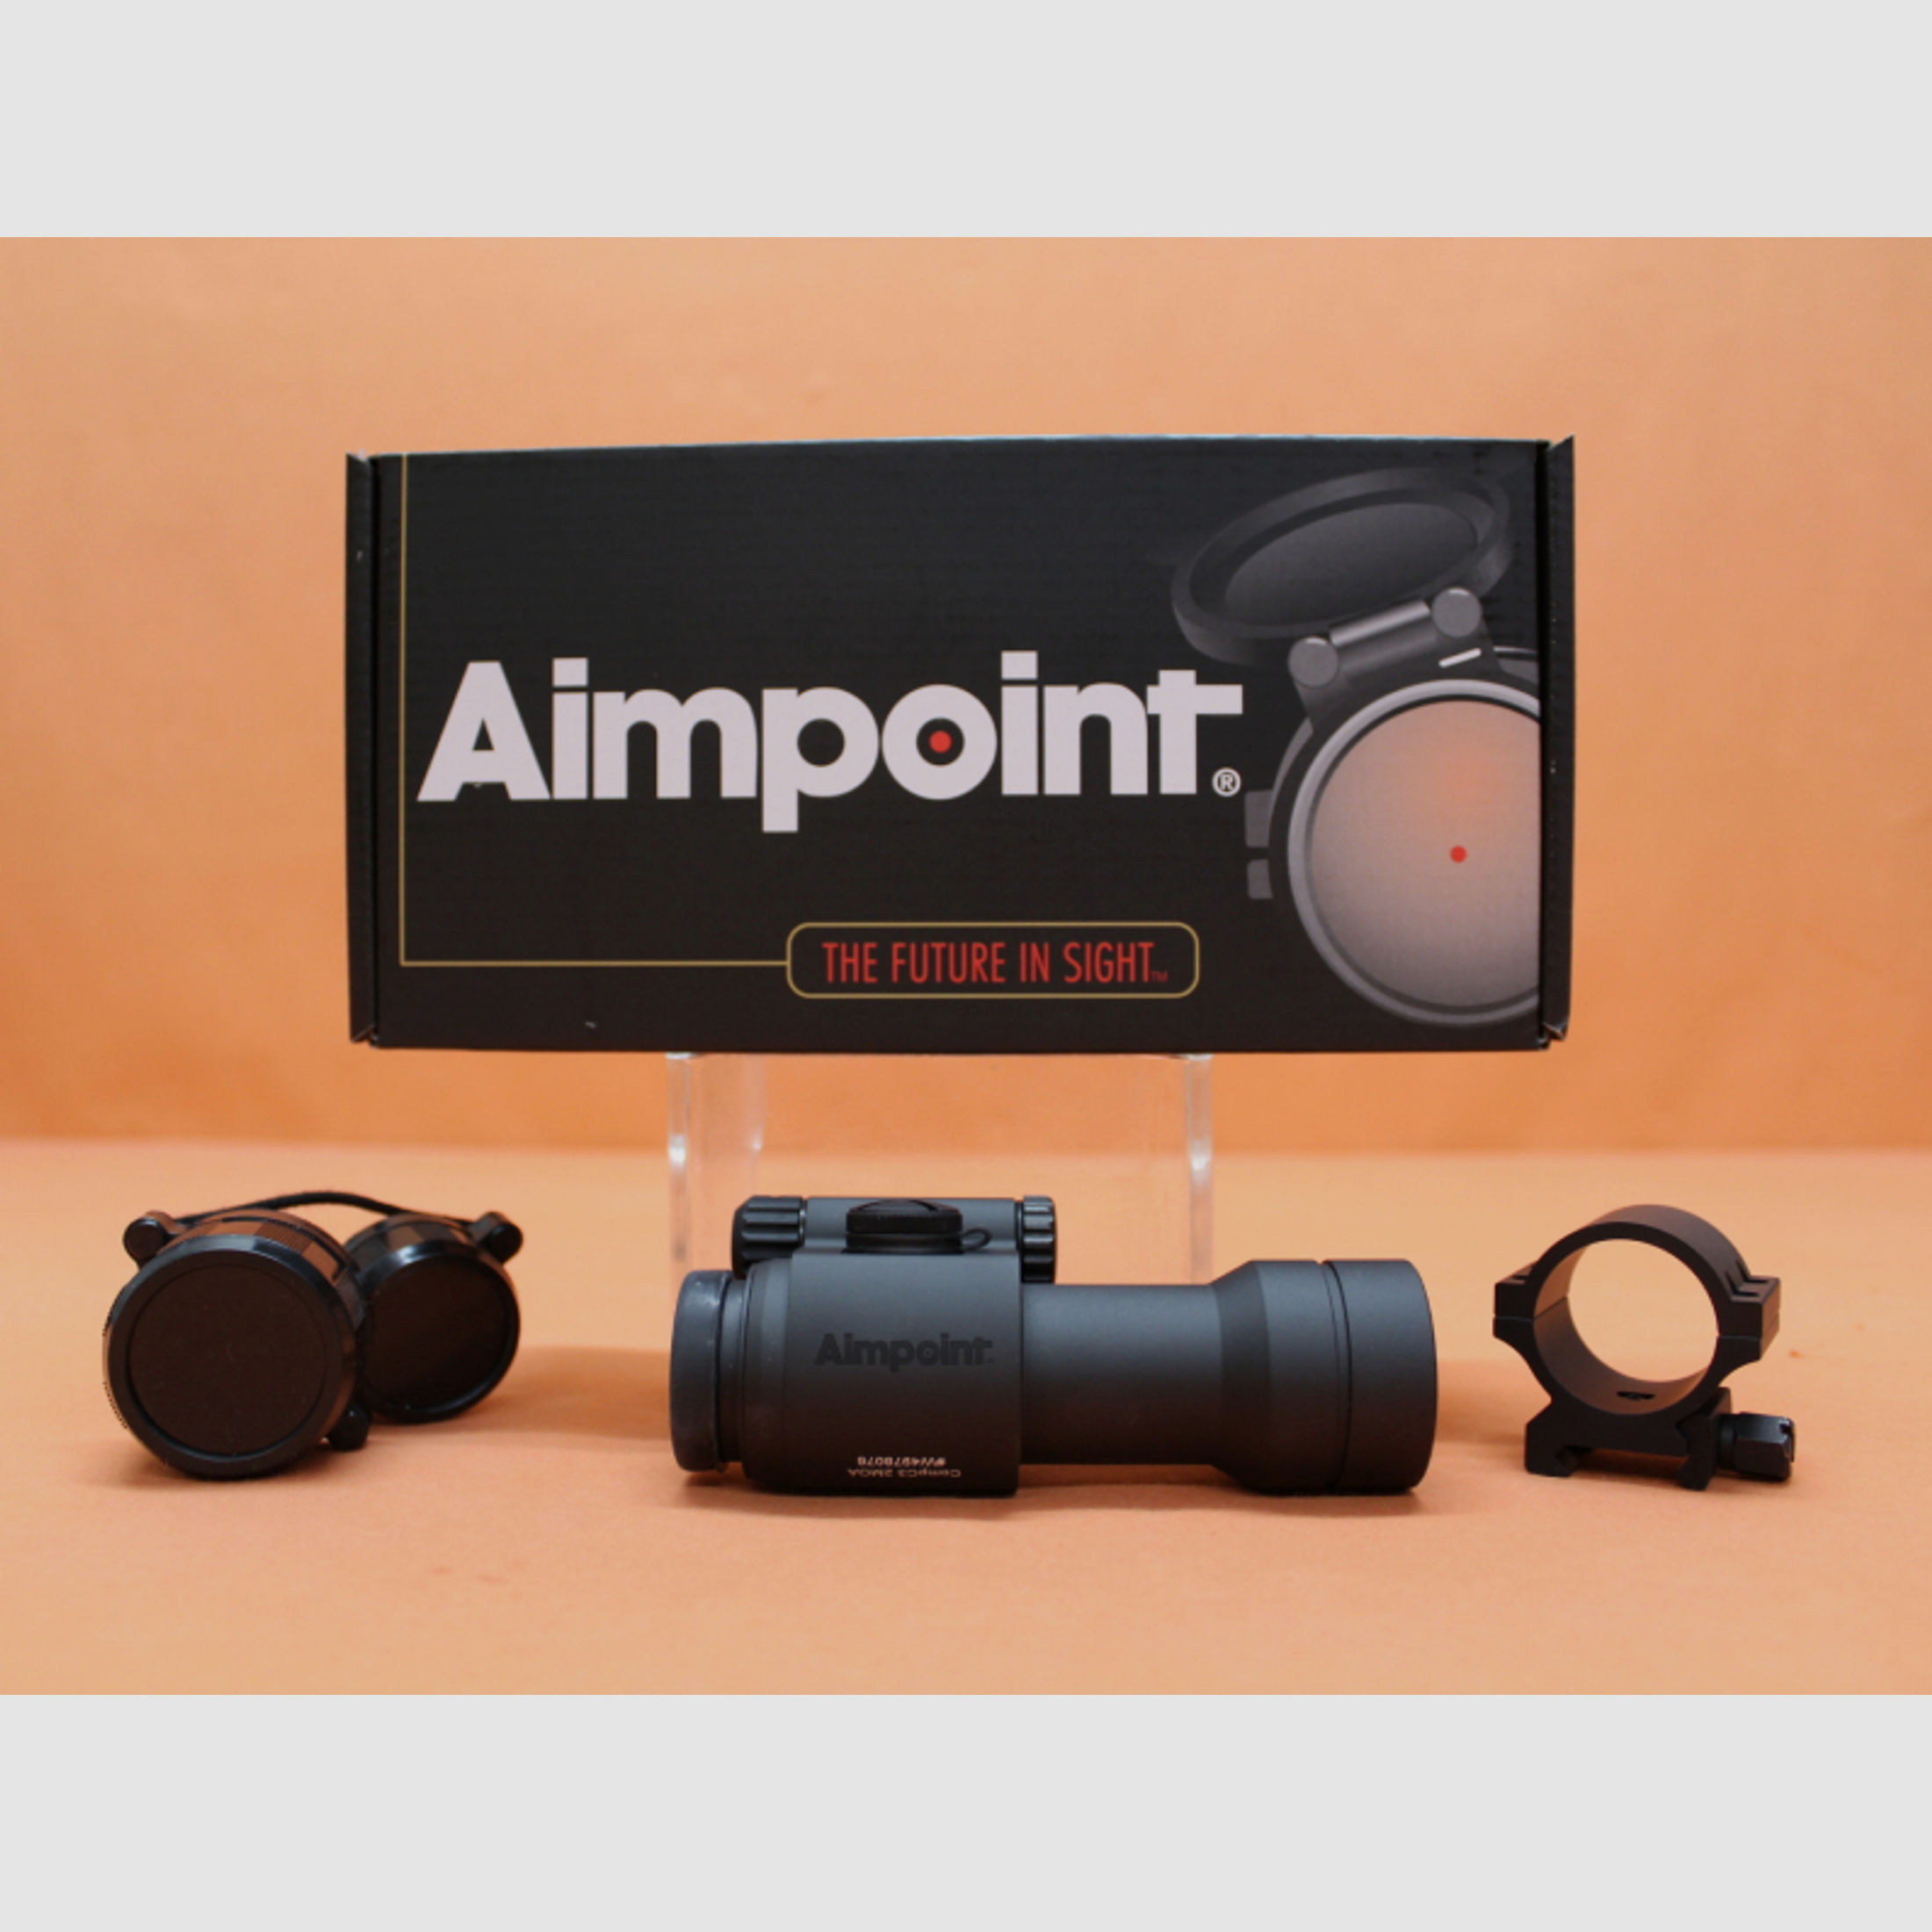 Aimpoint Comp C3 (11421) Leuchtpunktvisier 2MOA Dot (6cm auf 100m)/ Montagering f. Weaver/ Picatinny